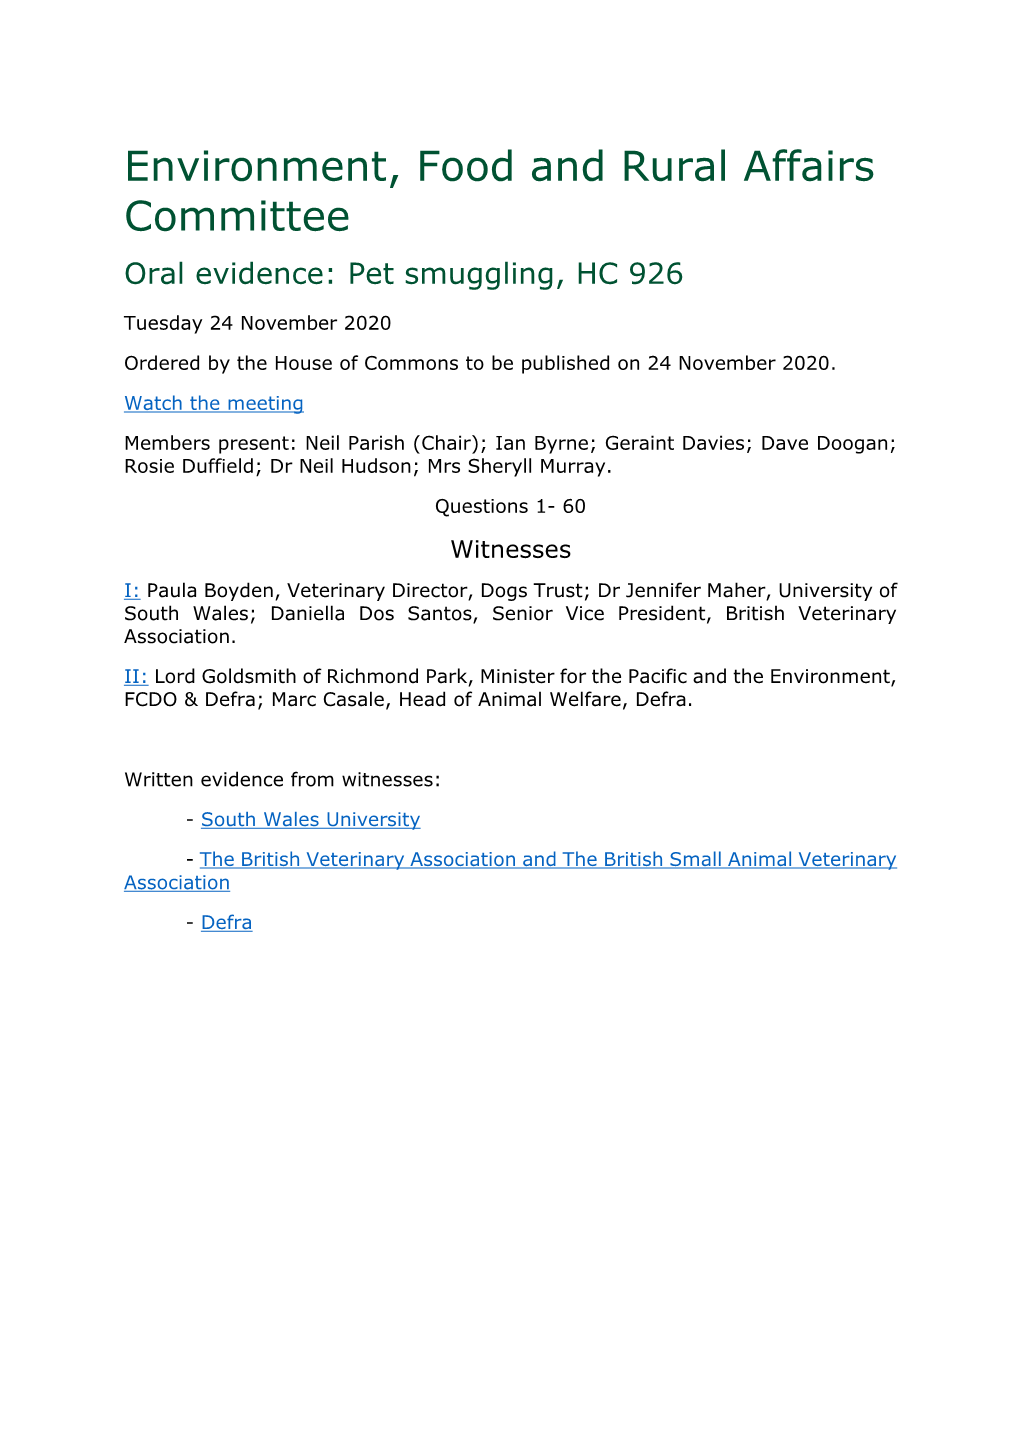 Environment, Food and Rural Affairs Committee Oral Evidence: Pet Smuggling, HC 926